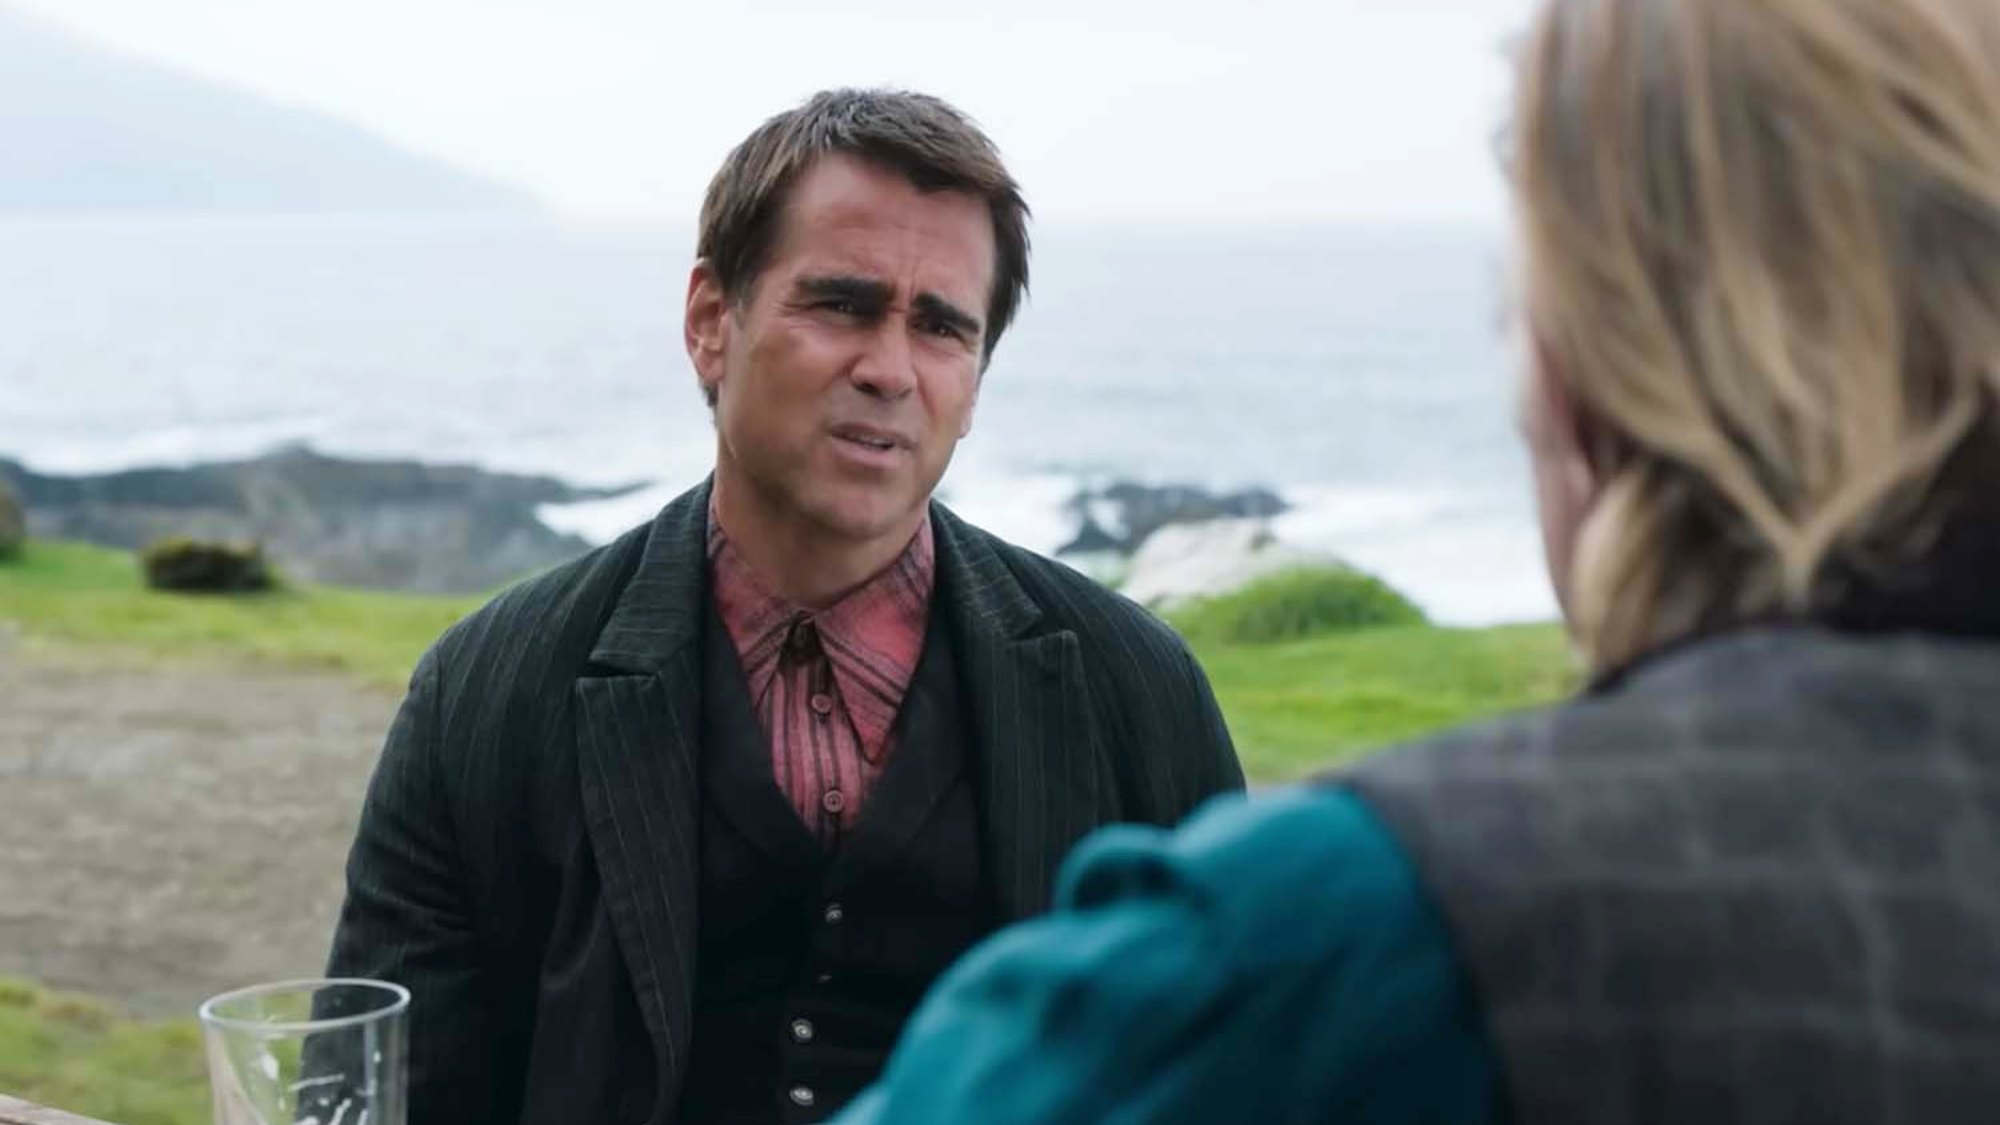 Colin Farrell (as Pádraic), looking confused at Brendan Gleeson (as Colm) in The Banshees of Inisherin